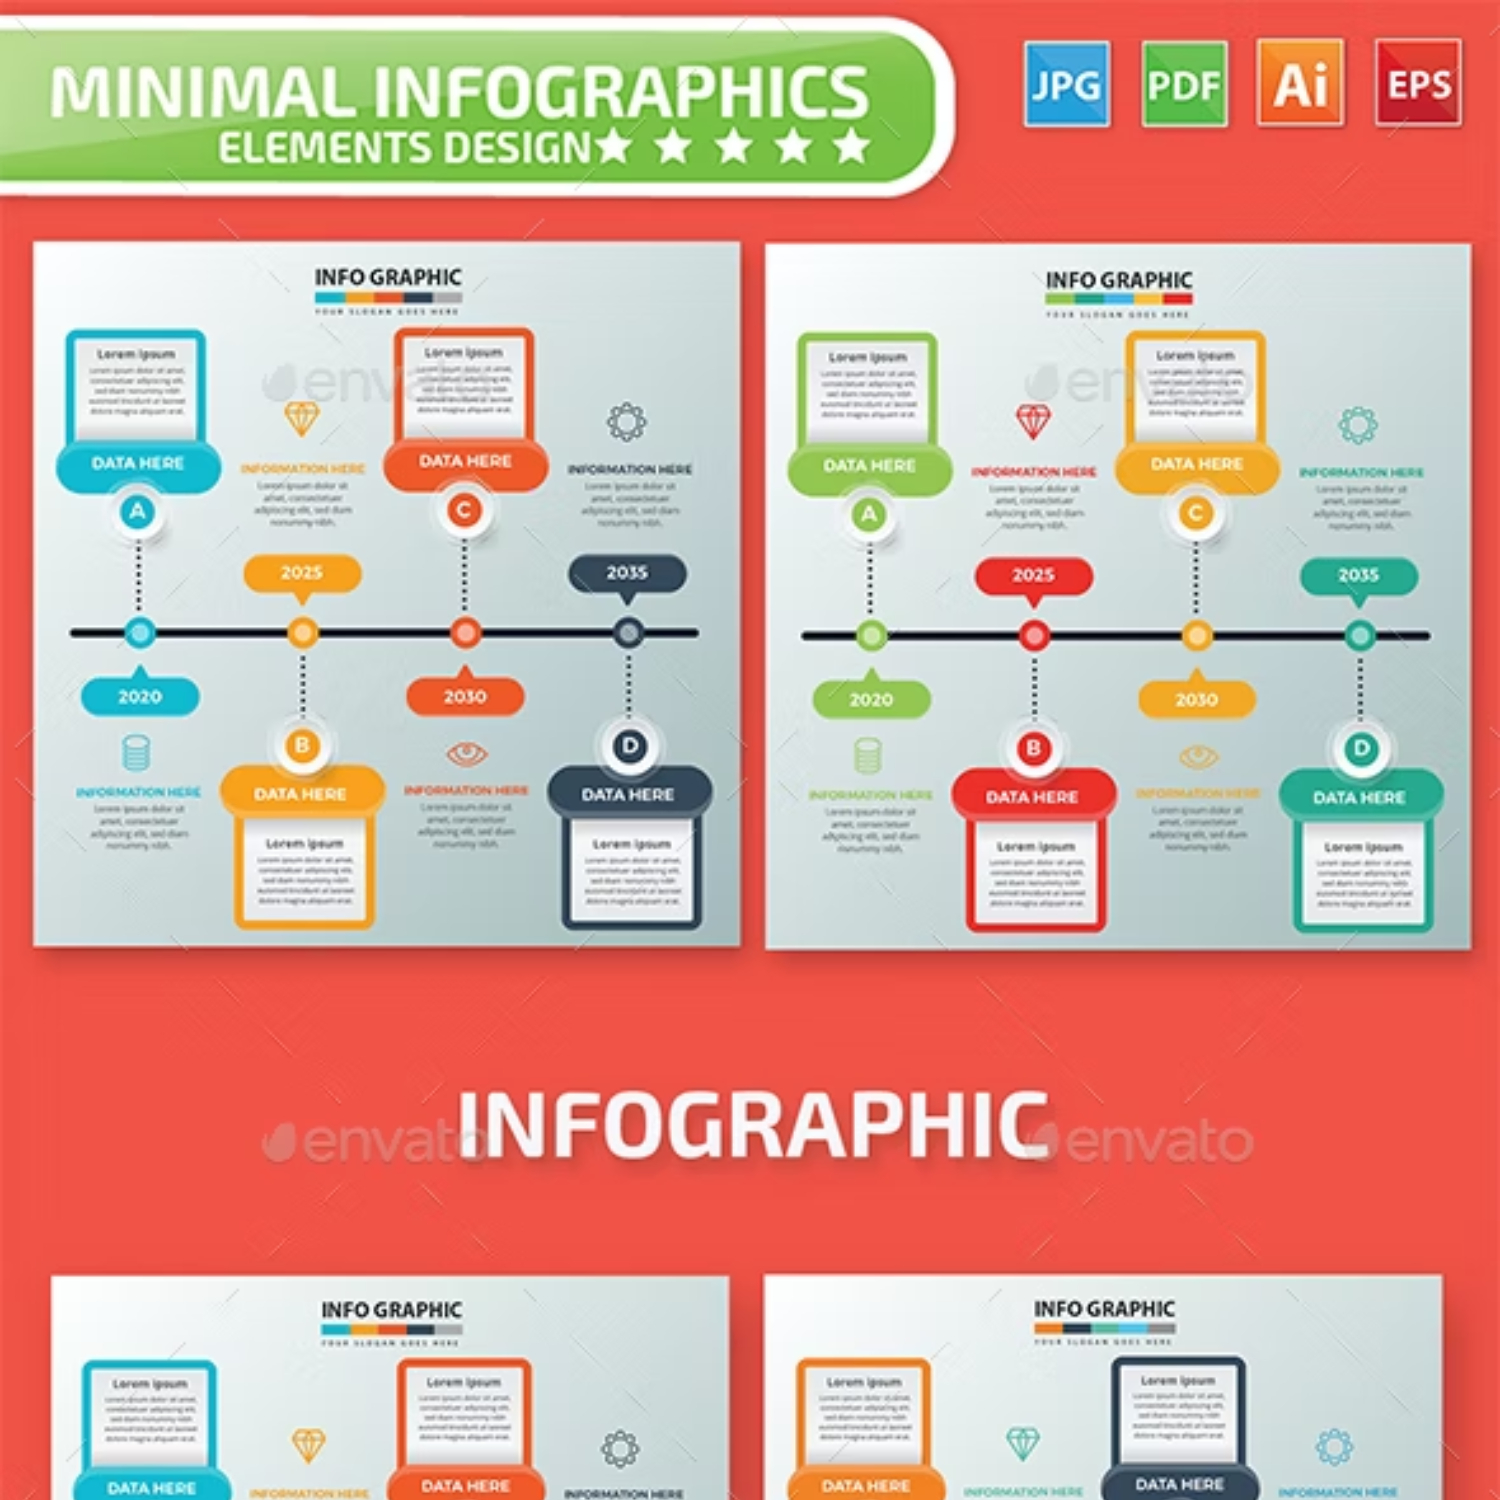 Infographics Design Main Cover.